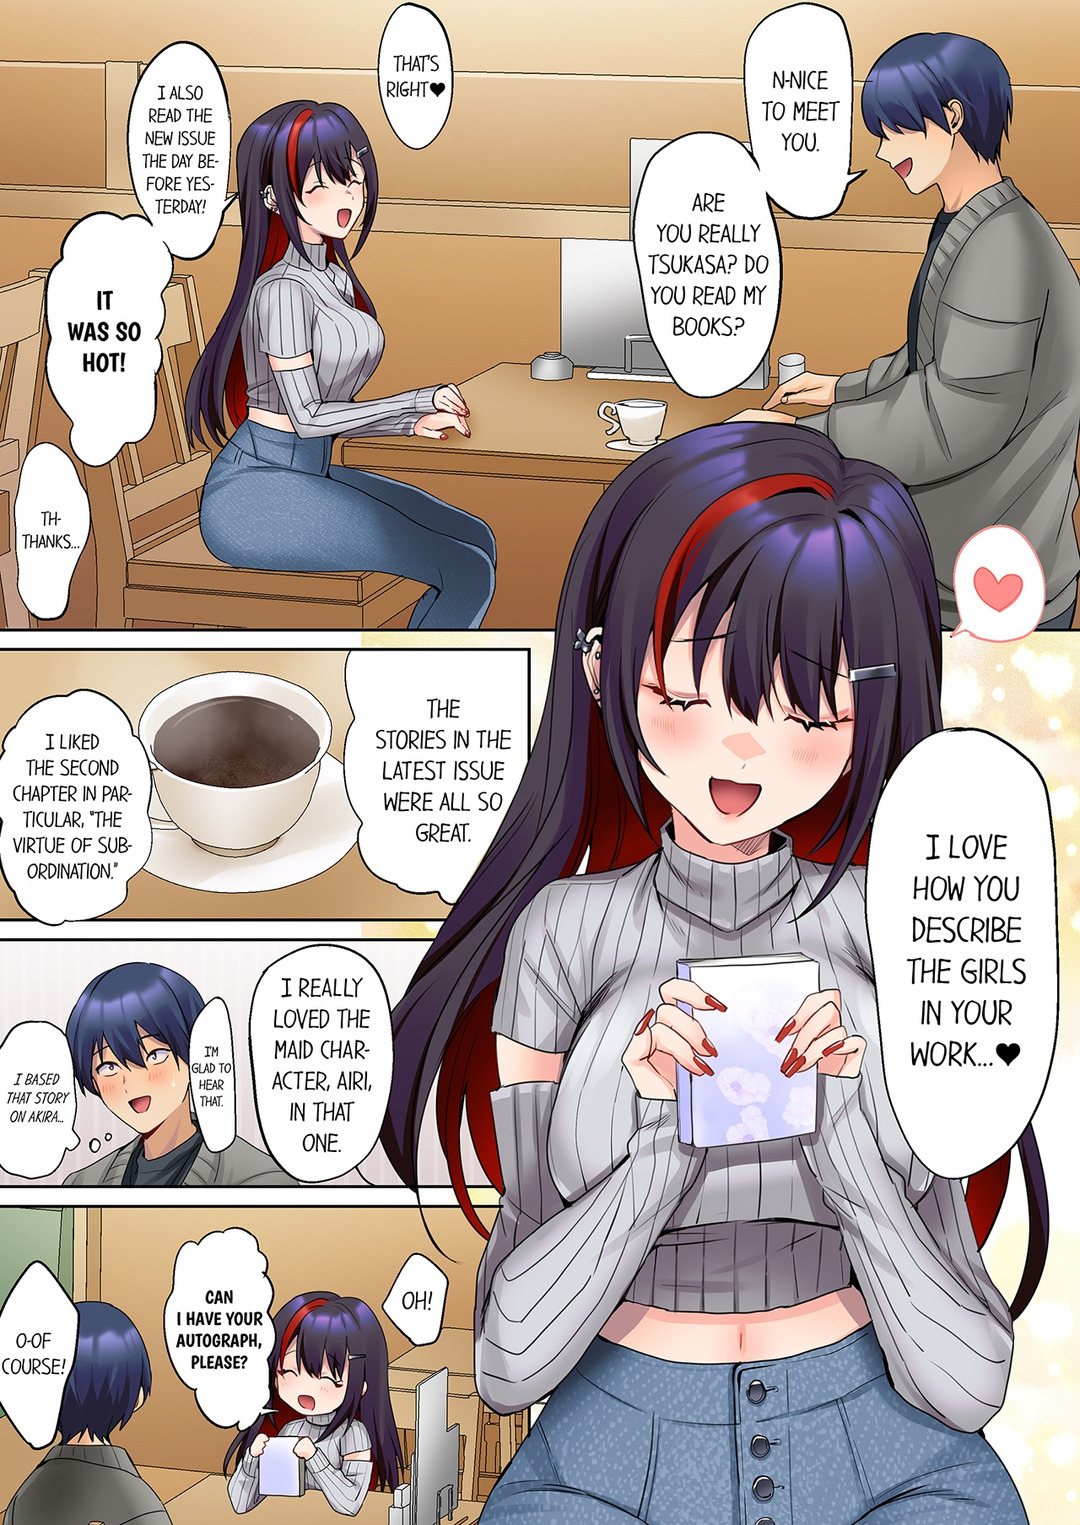 The Quiet Girl’s Erogenous Zone - Chapter 31 Page 3